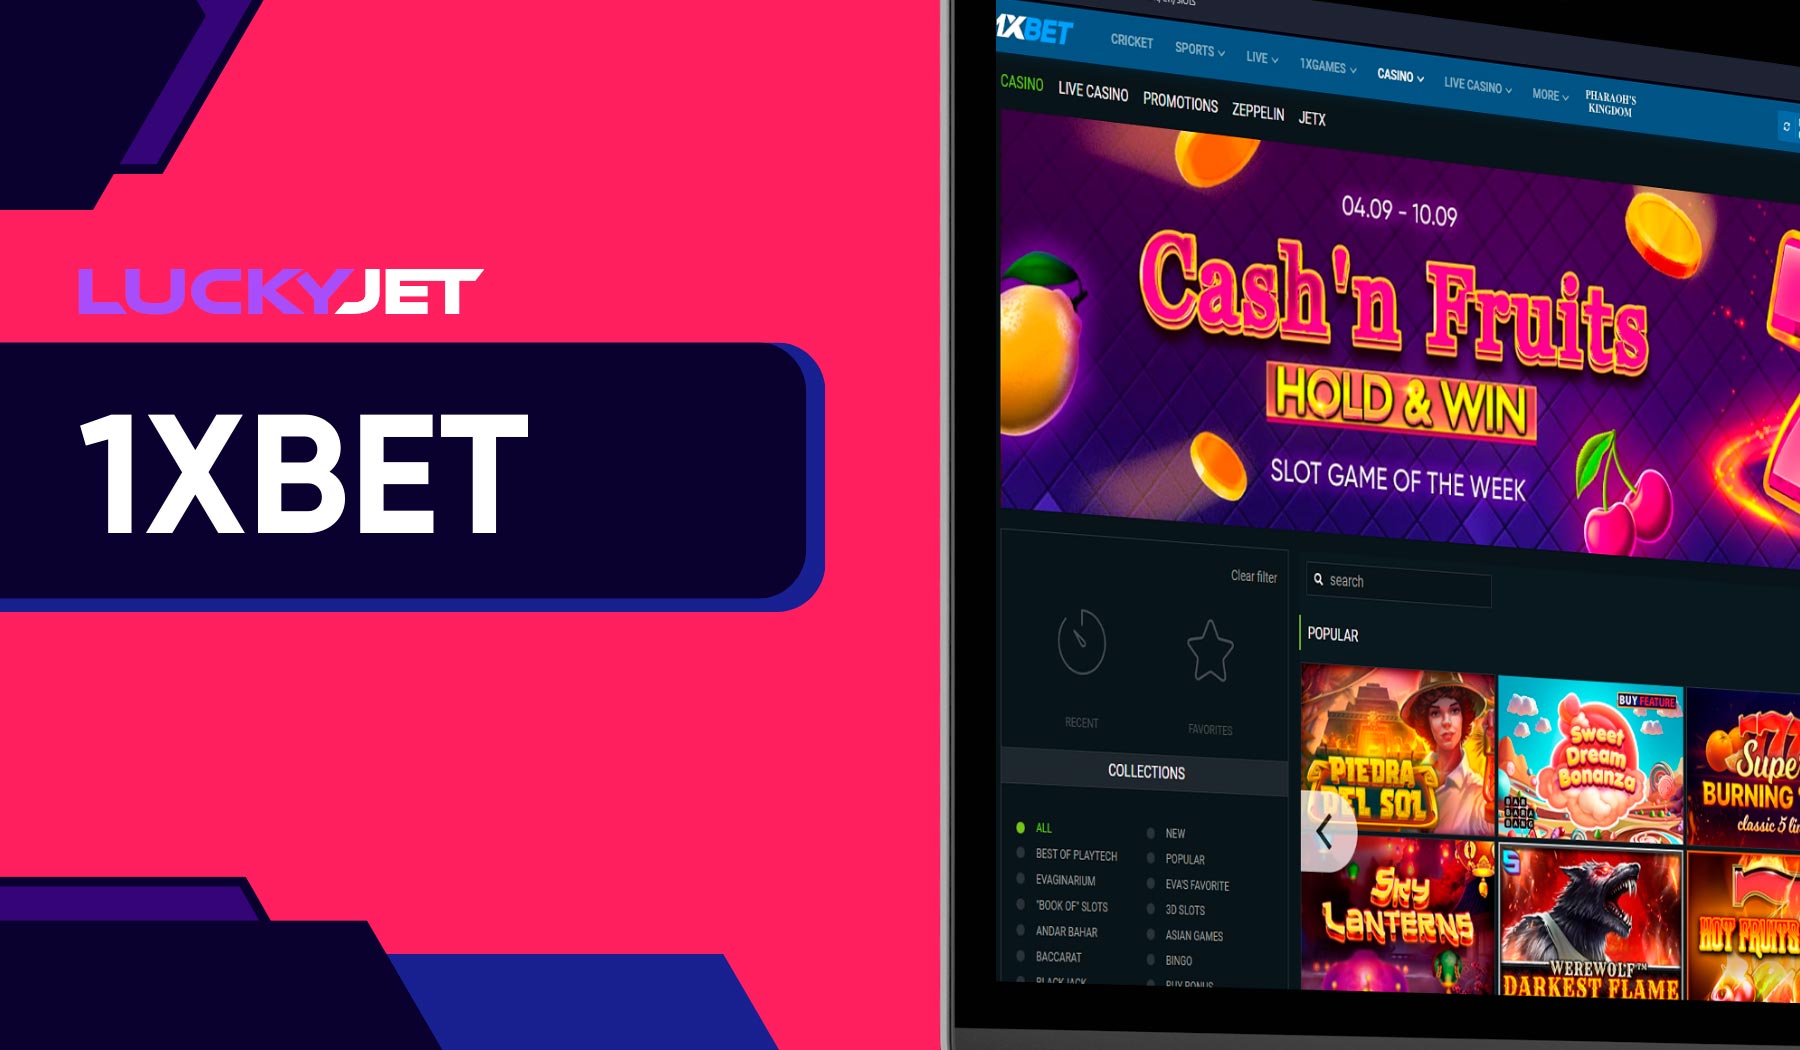 1xbet is top 5 sites for Lucky Jet game